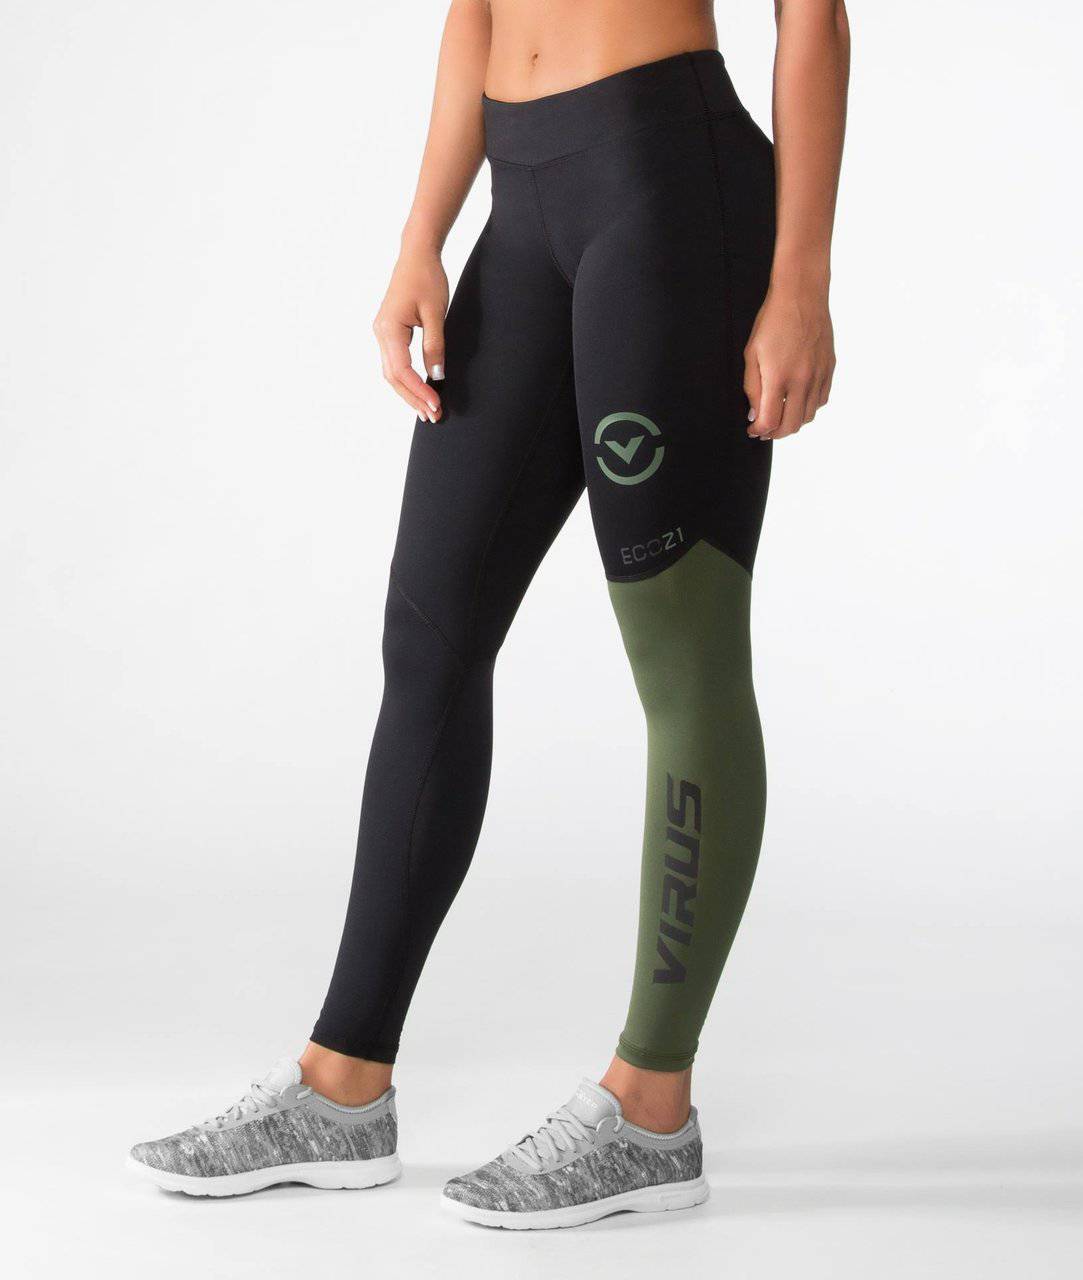 Virus | ESio50 Omega Stay Warm Compression 7/8 Length Pant